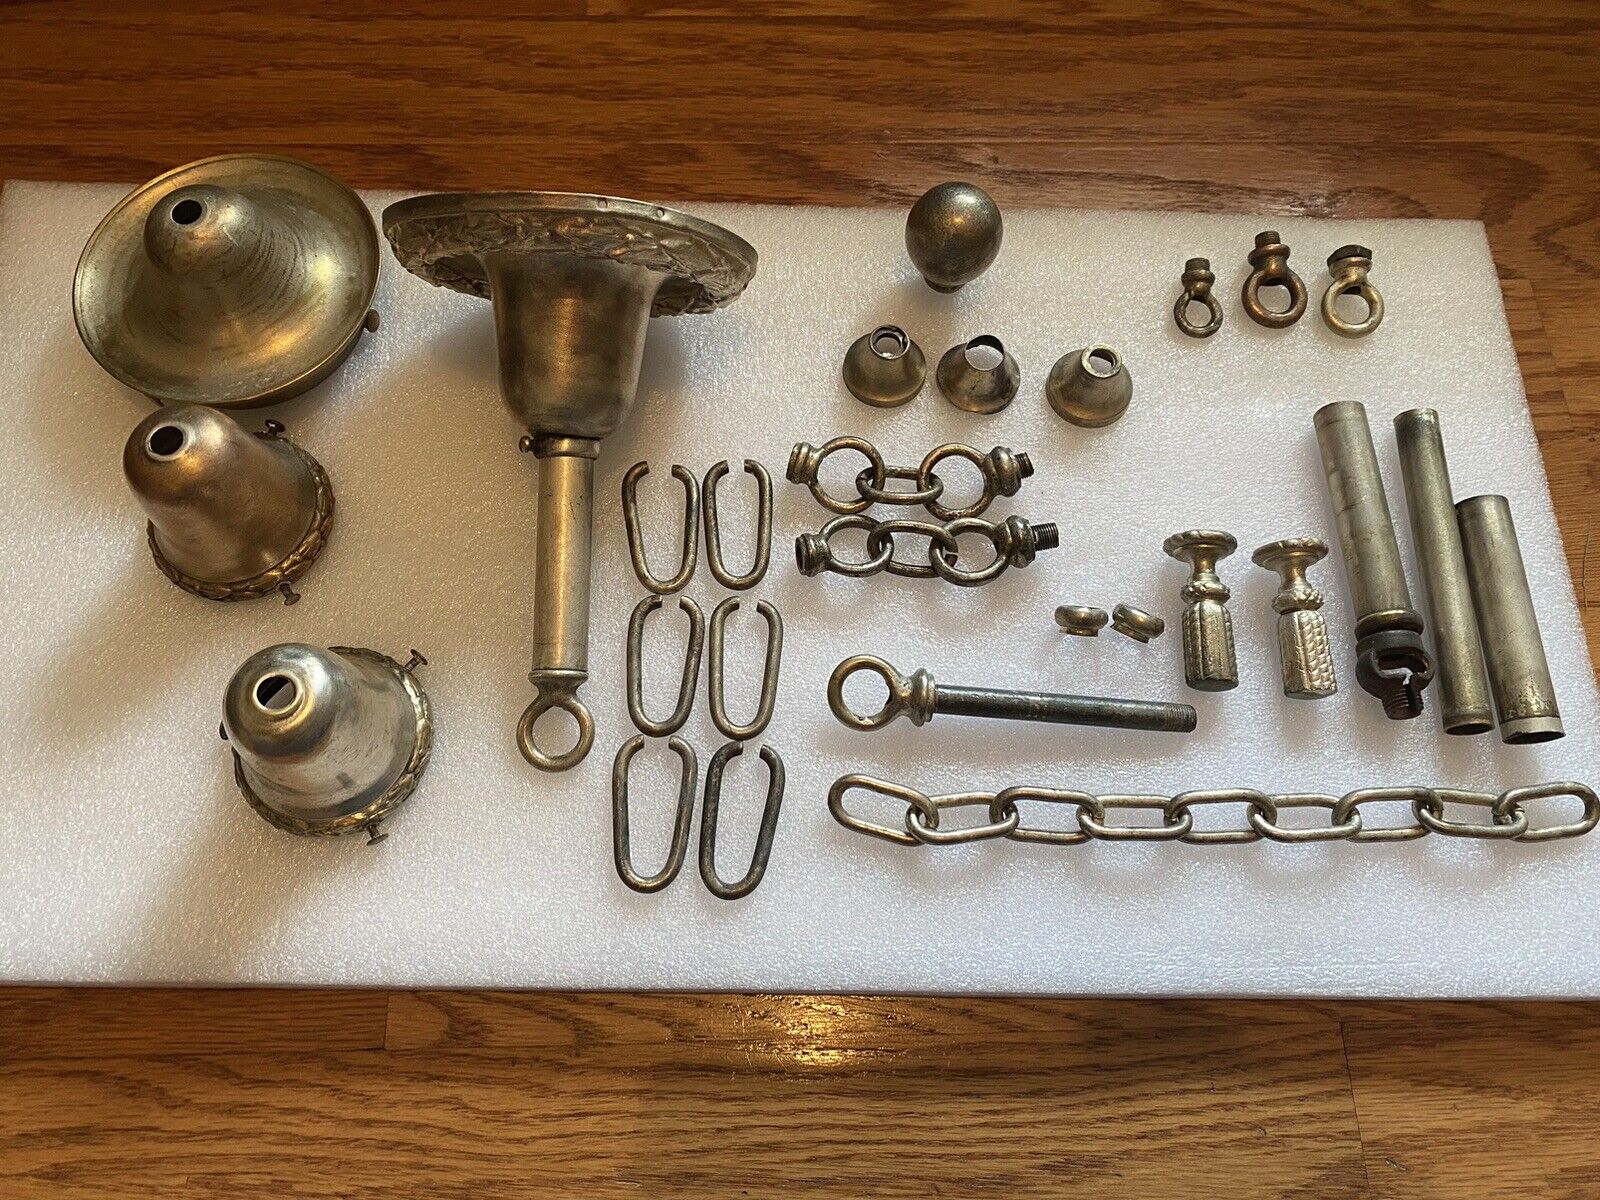 Antique Light Parts Silver Plated Brass Finials Shade Holders Chain Canopy